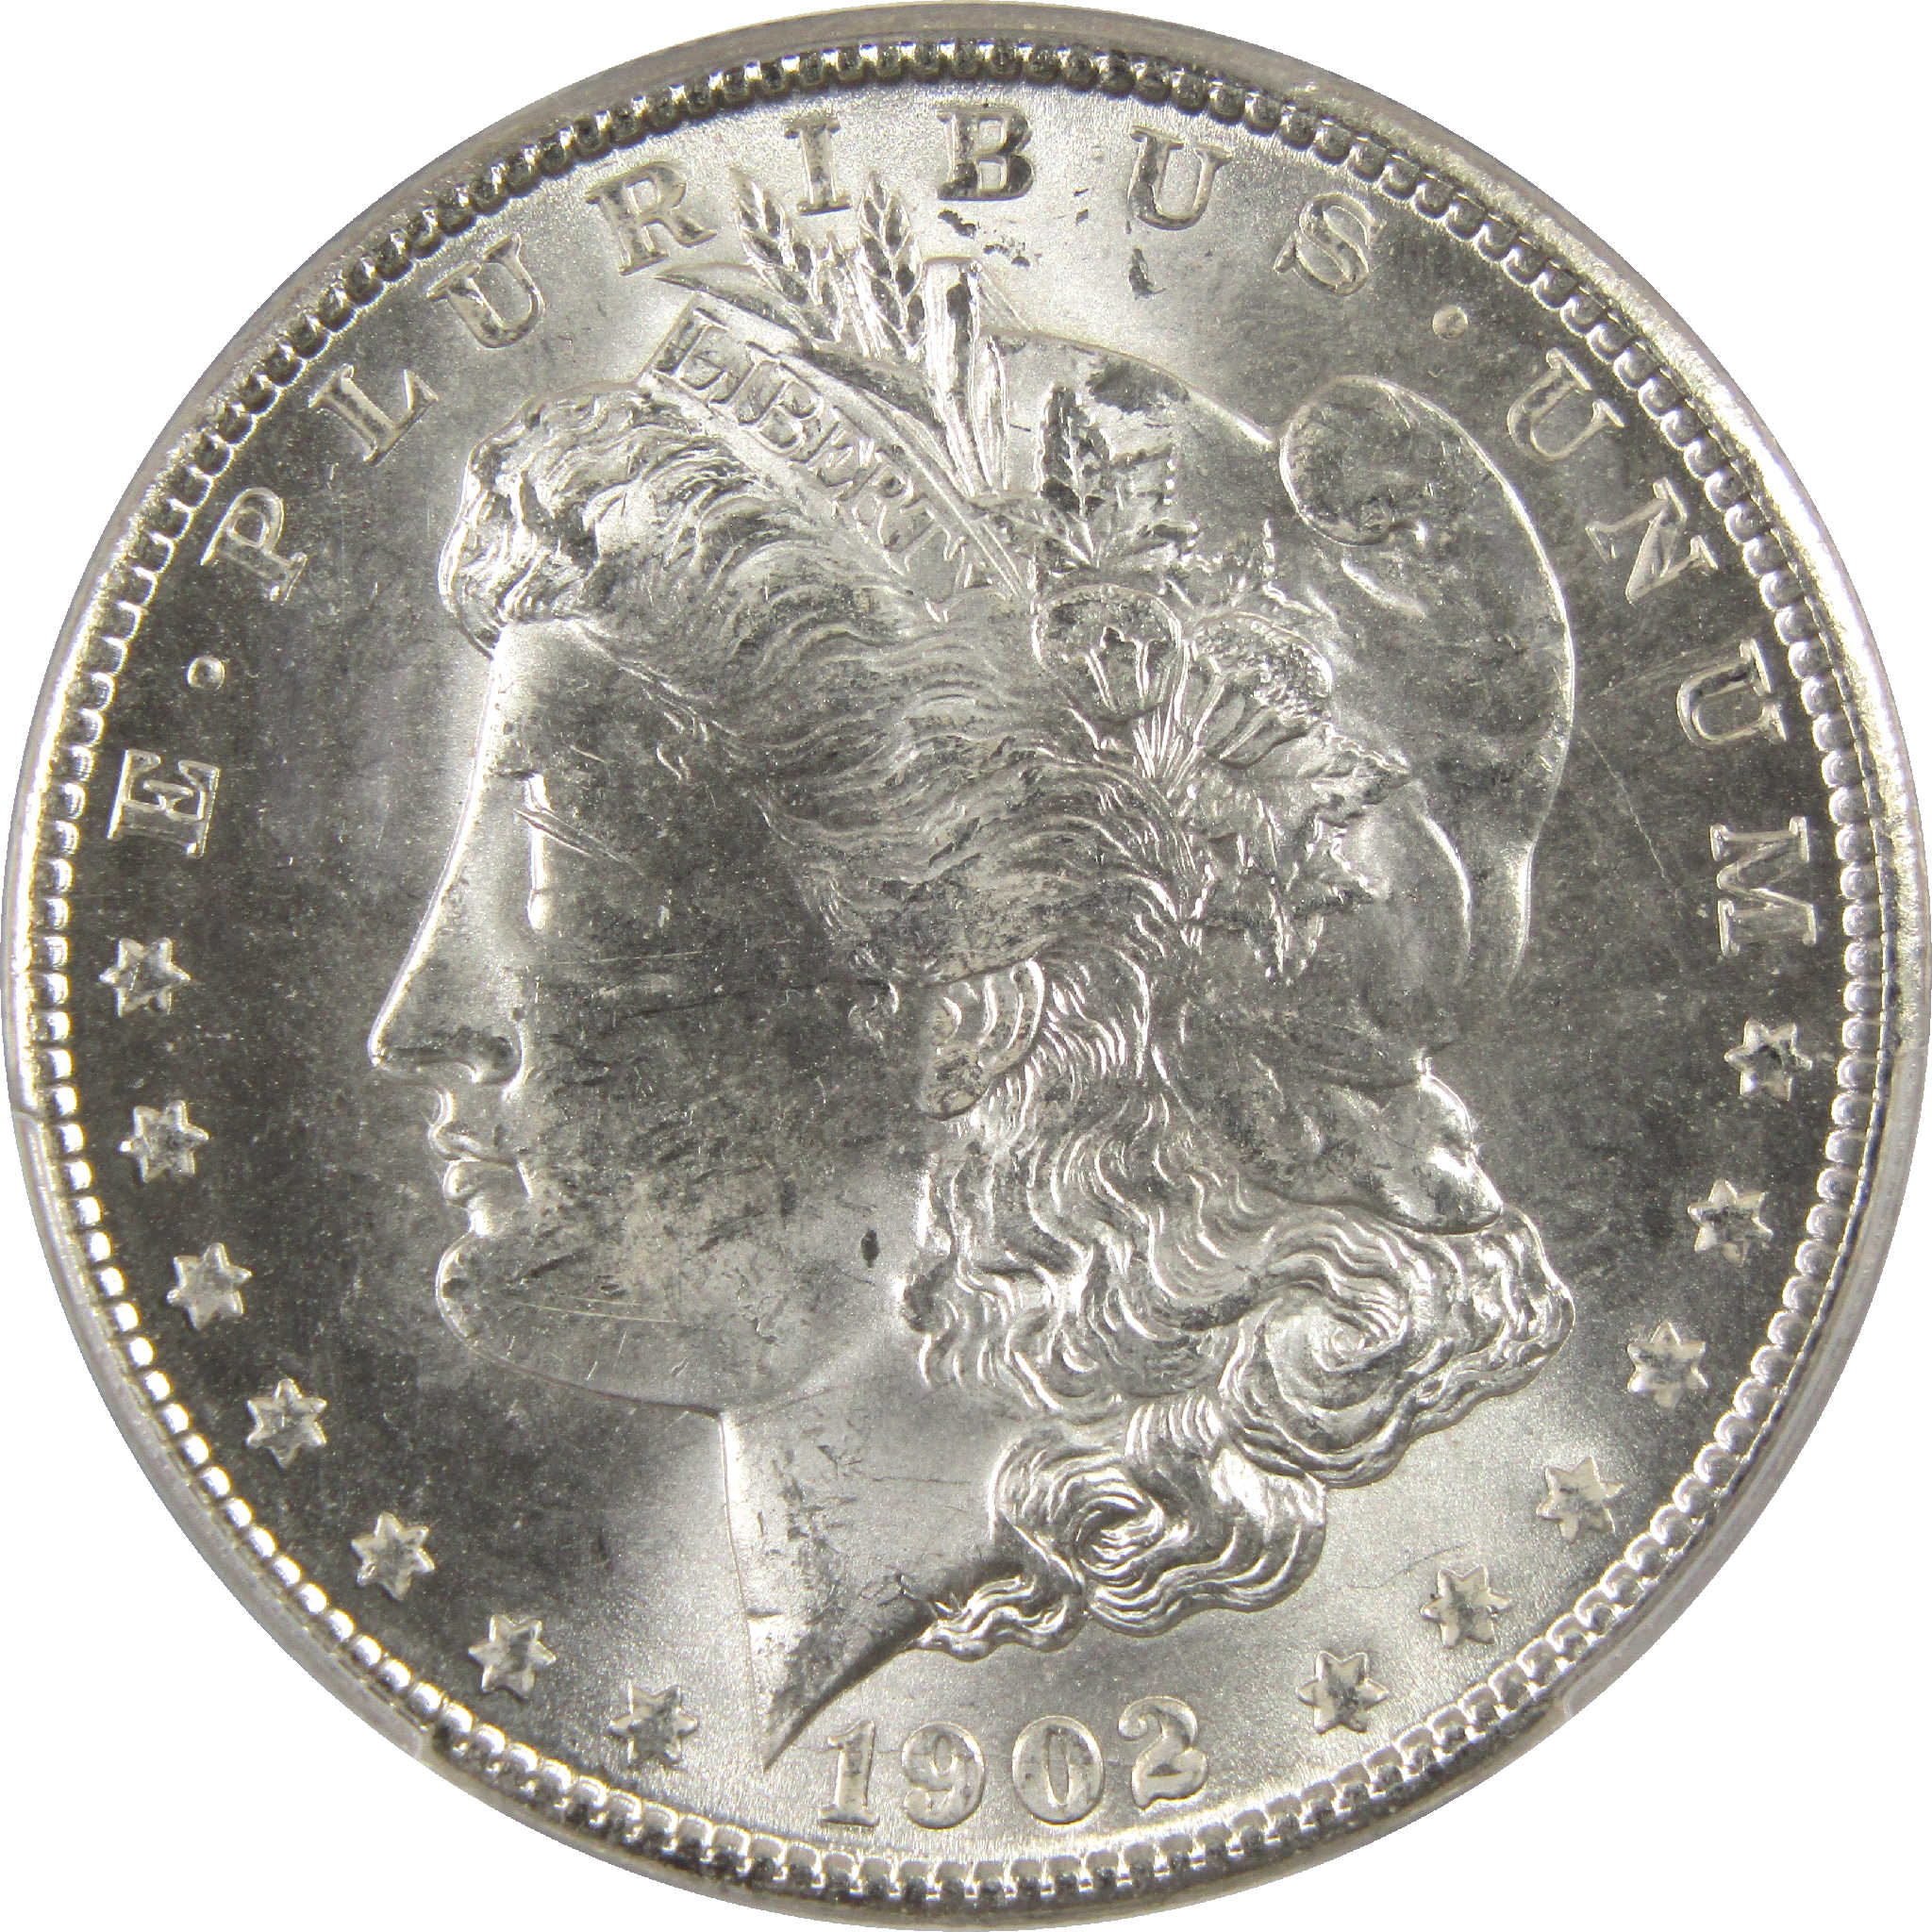 1902 O Morgan Dollar MS 64 PCGS Silver $1 Uncirculated Coin SKU:I11607 - Morgan coin - Morgan silver dollar - Morgan silver dollar for sale - Profile Coins &amp; Collectibles